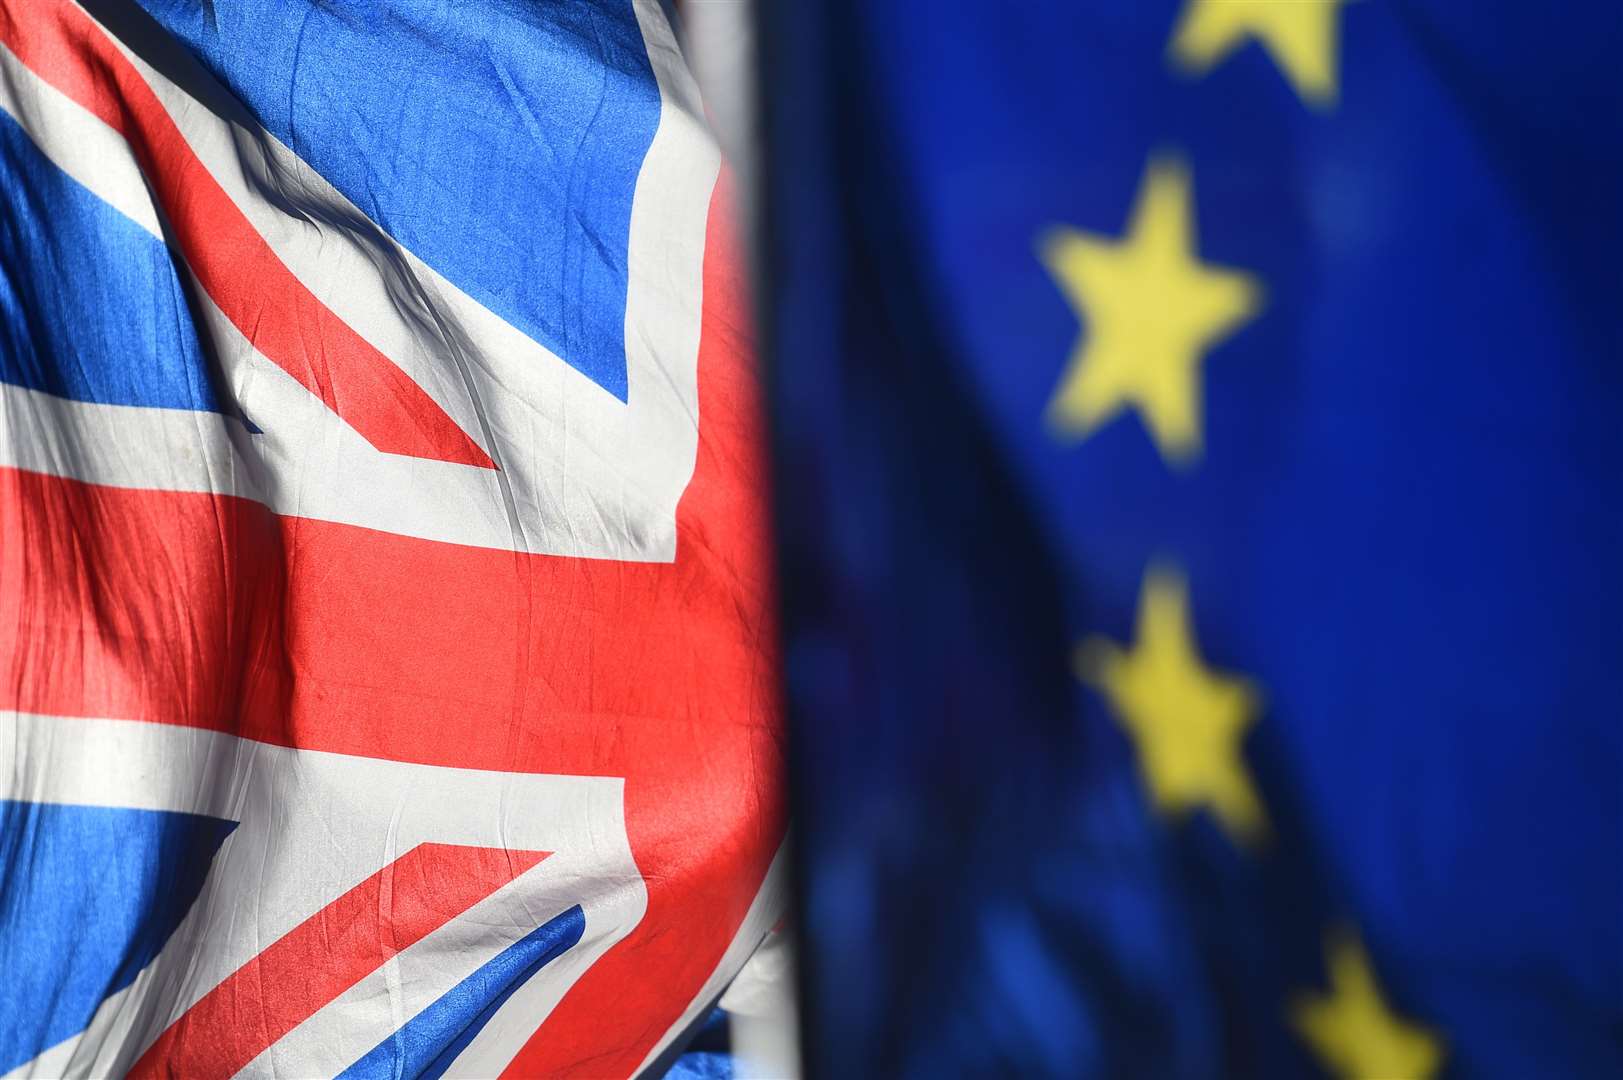 Changes due to Brexit will be felt when it comes to importing later this year